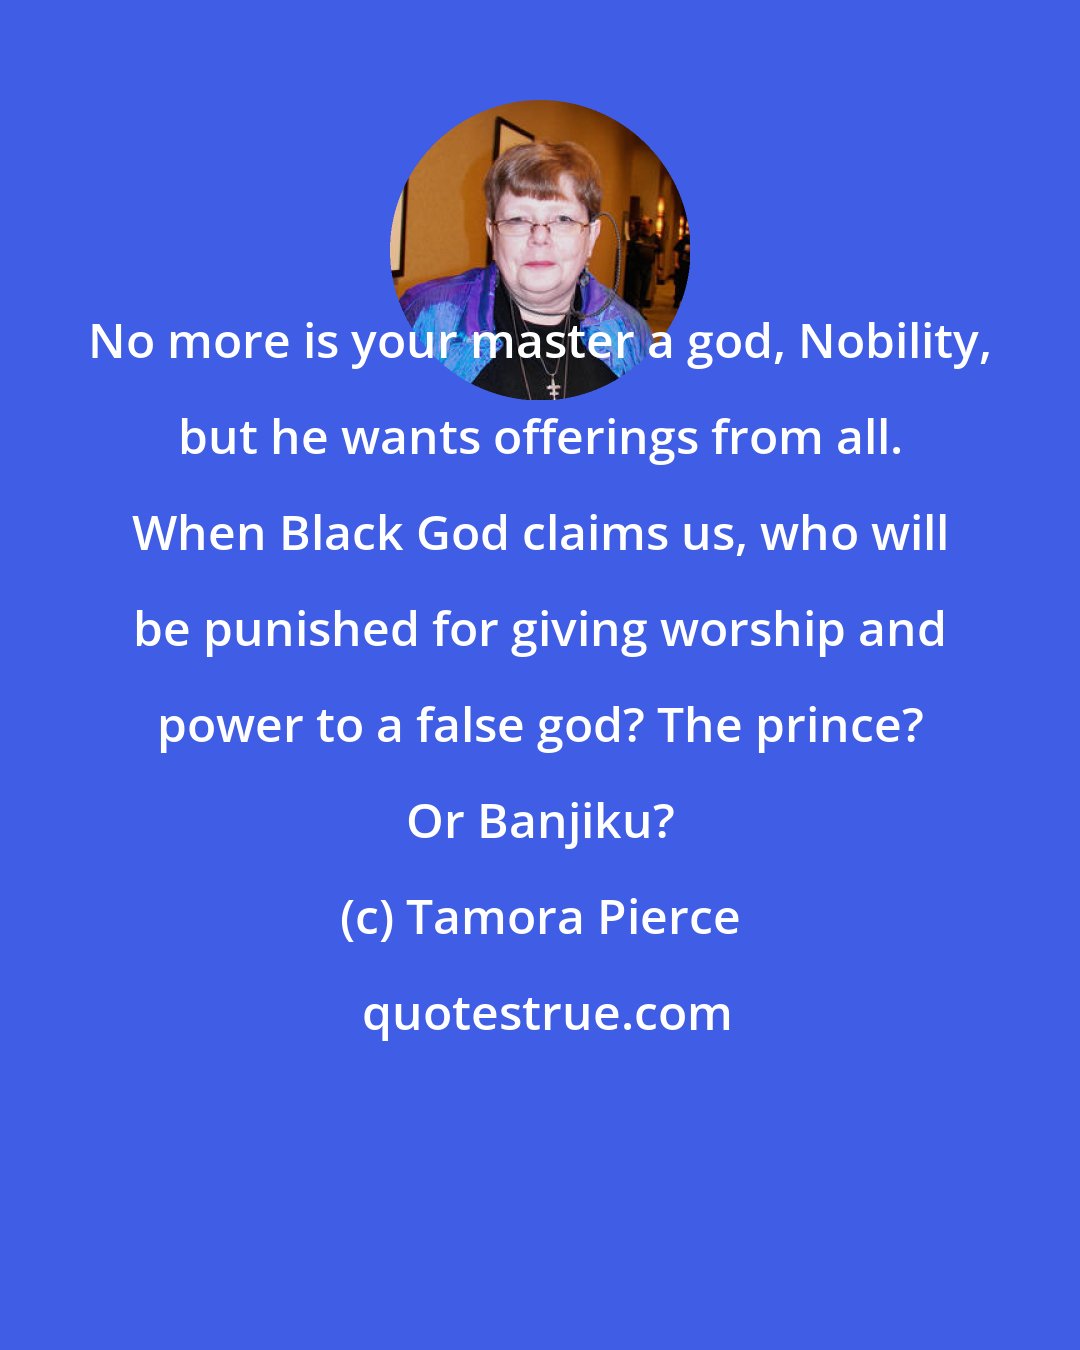 Tamora Pierce: No more is your master a god, Nobility, but he wants offerings from all. When Black God claims us, who will be punished for giving worship and power to a false god? The prince? Or Banjiku?